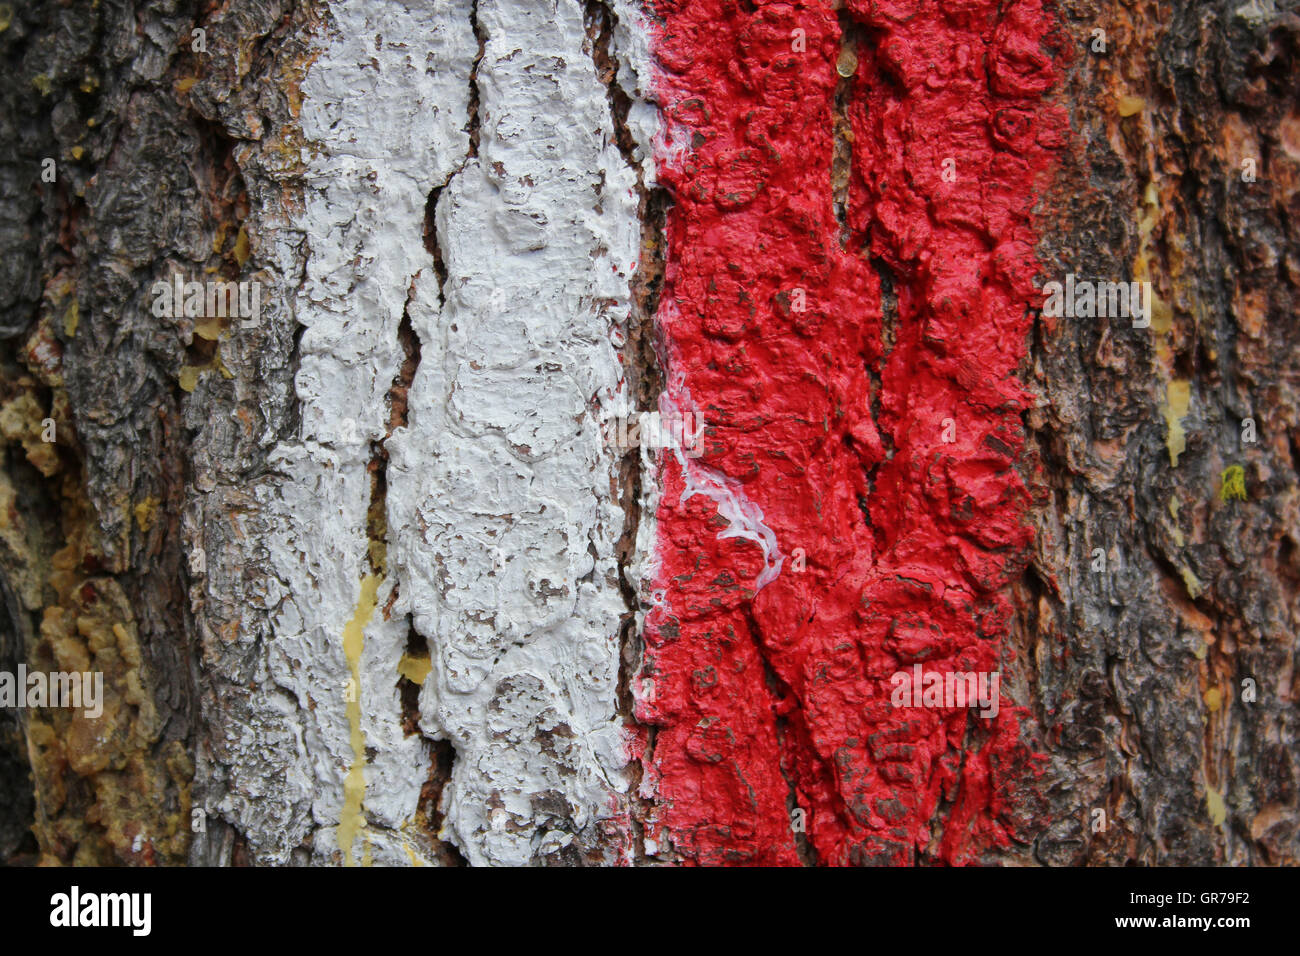 Mark On A Tree In Red And White Colour Stock Photo